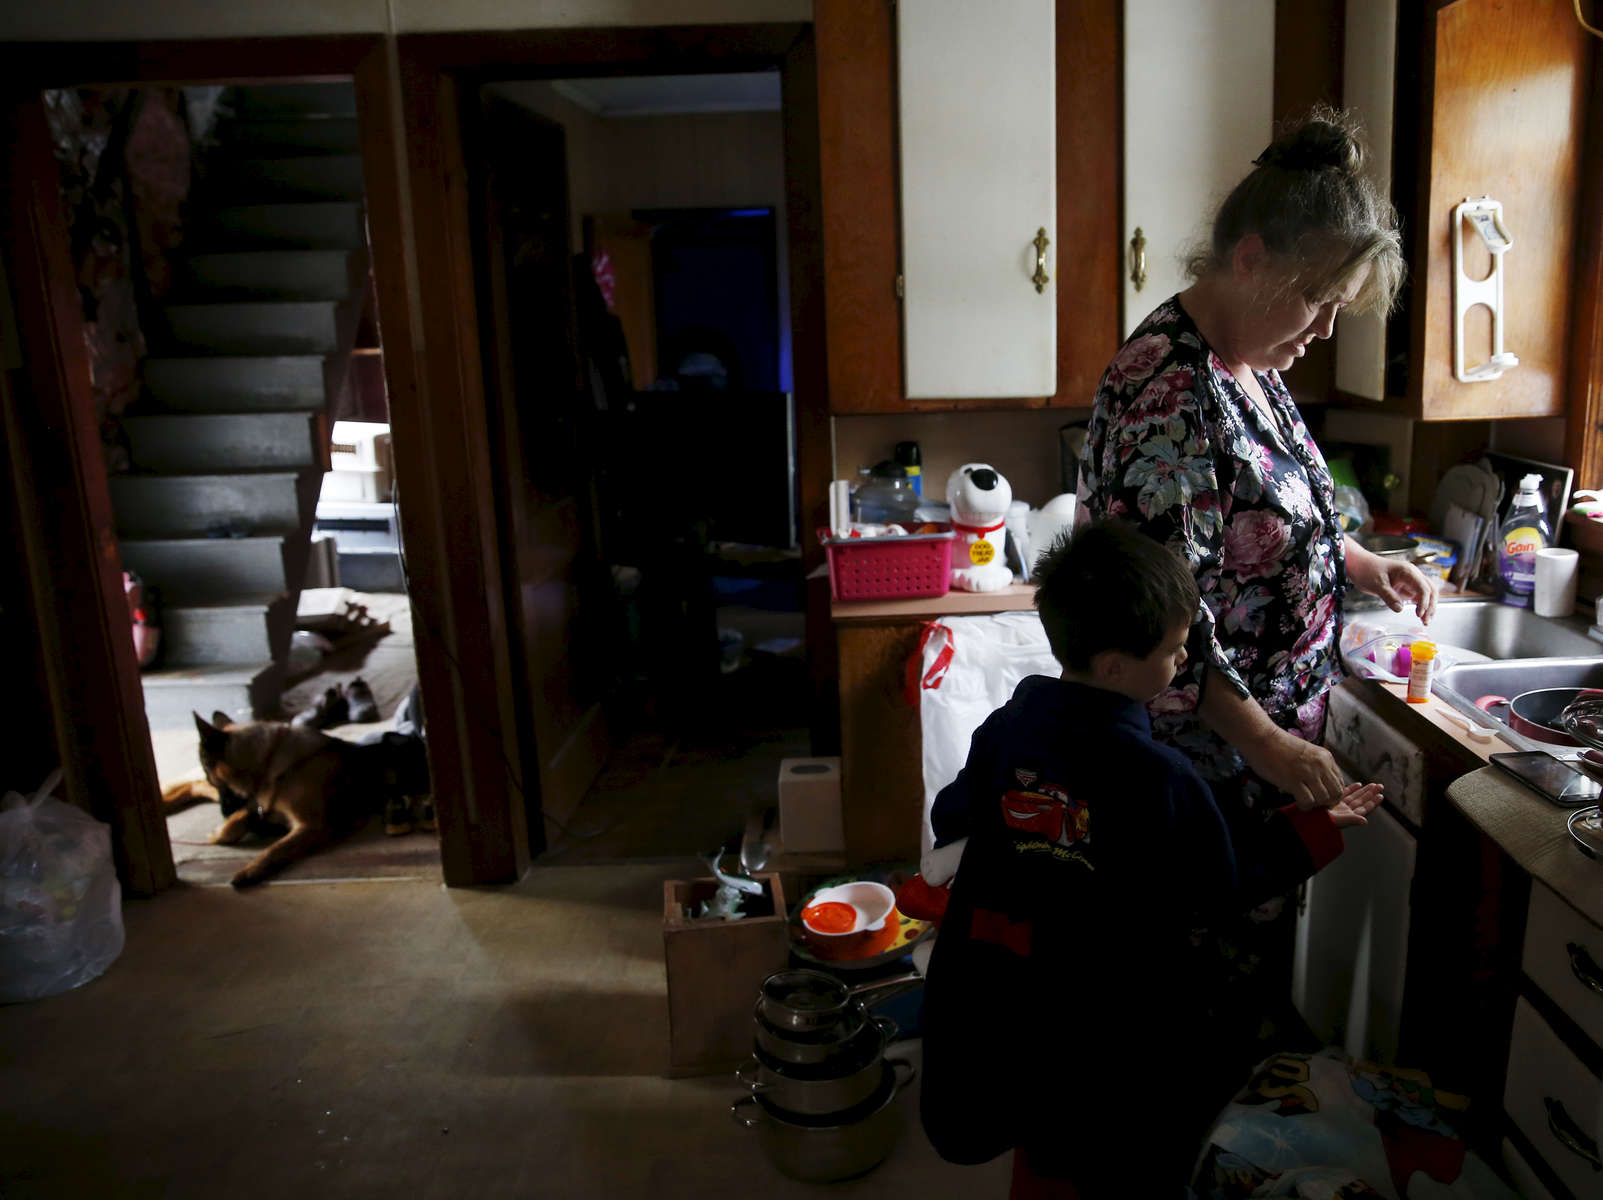 Lisbon, Maine -- 8/11/2015-- “Medicine!” Lanette called as she pulled out the plastic bin of the boys’ medicines. Strider extended his hand for his morning meds. “We haven’t been here 24 hours, and I’m tired already,” Lanette said. Jessica Rinaldi/Globe Staff